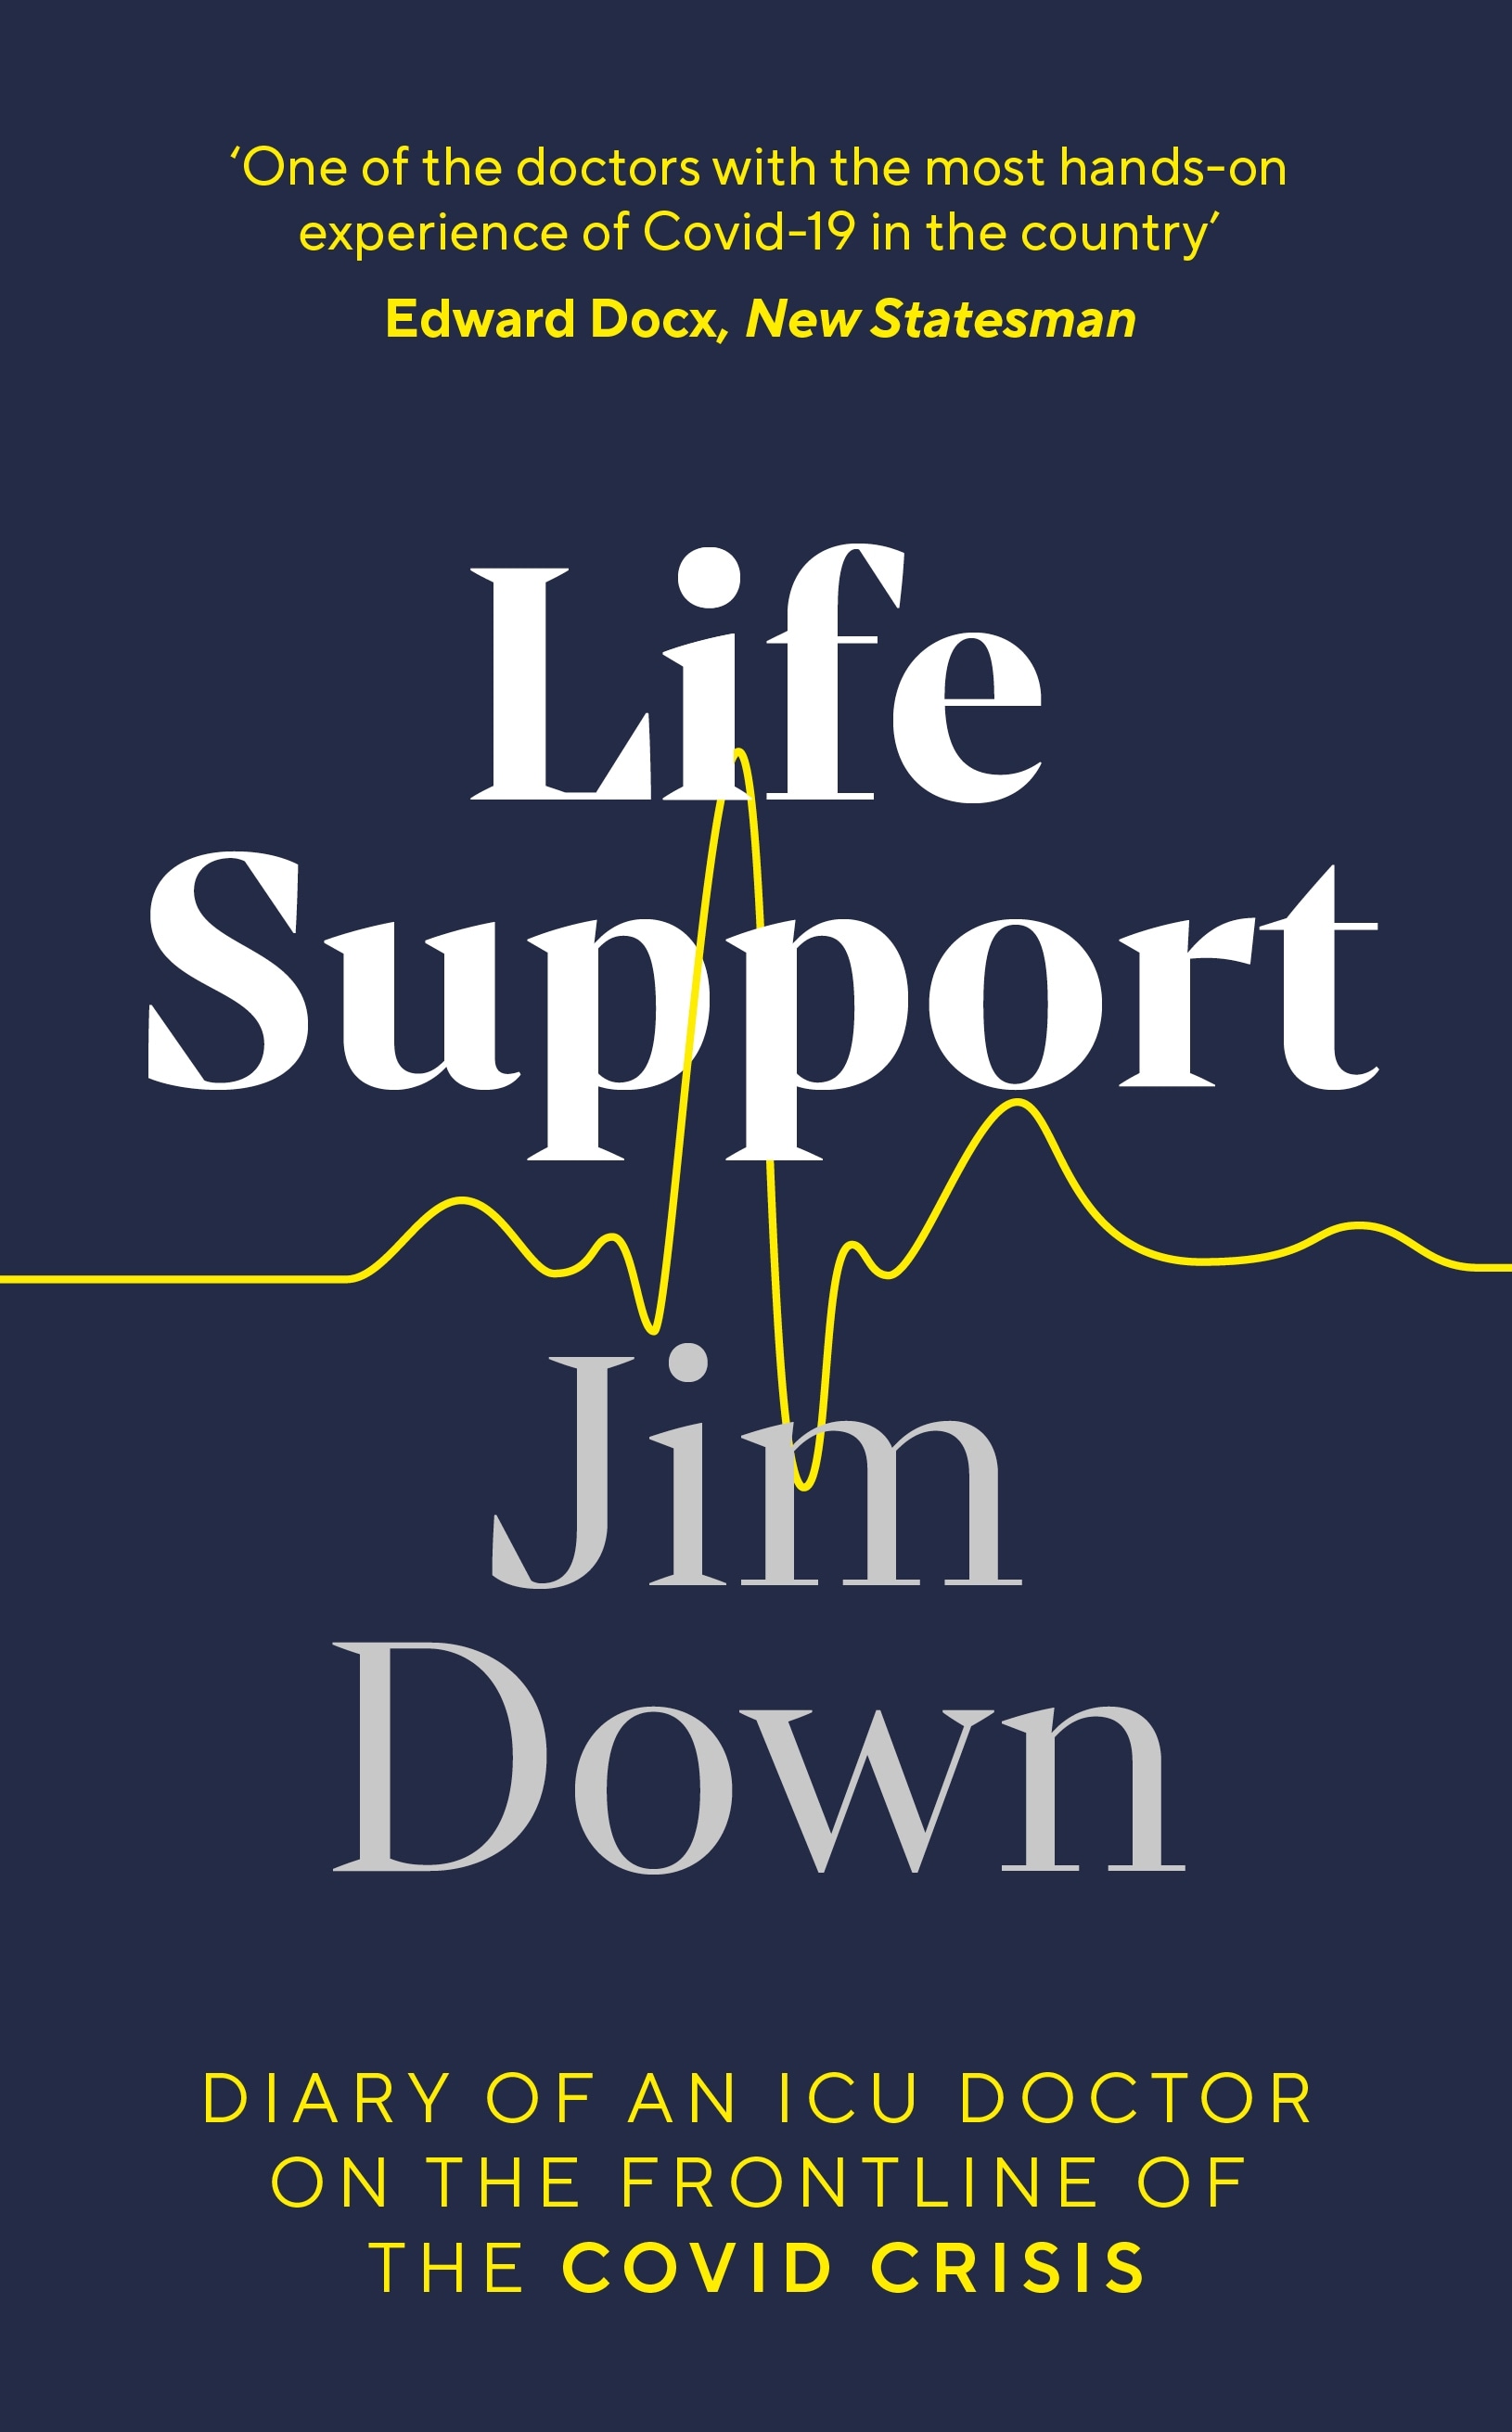 Book “Life Support” by Jim Down — March 4, 2021